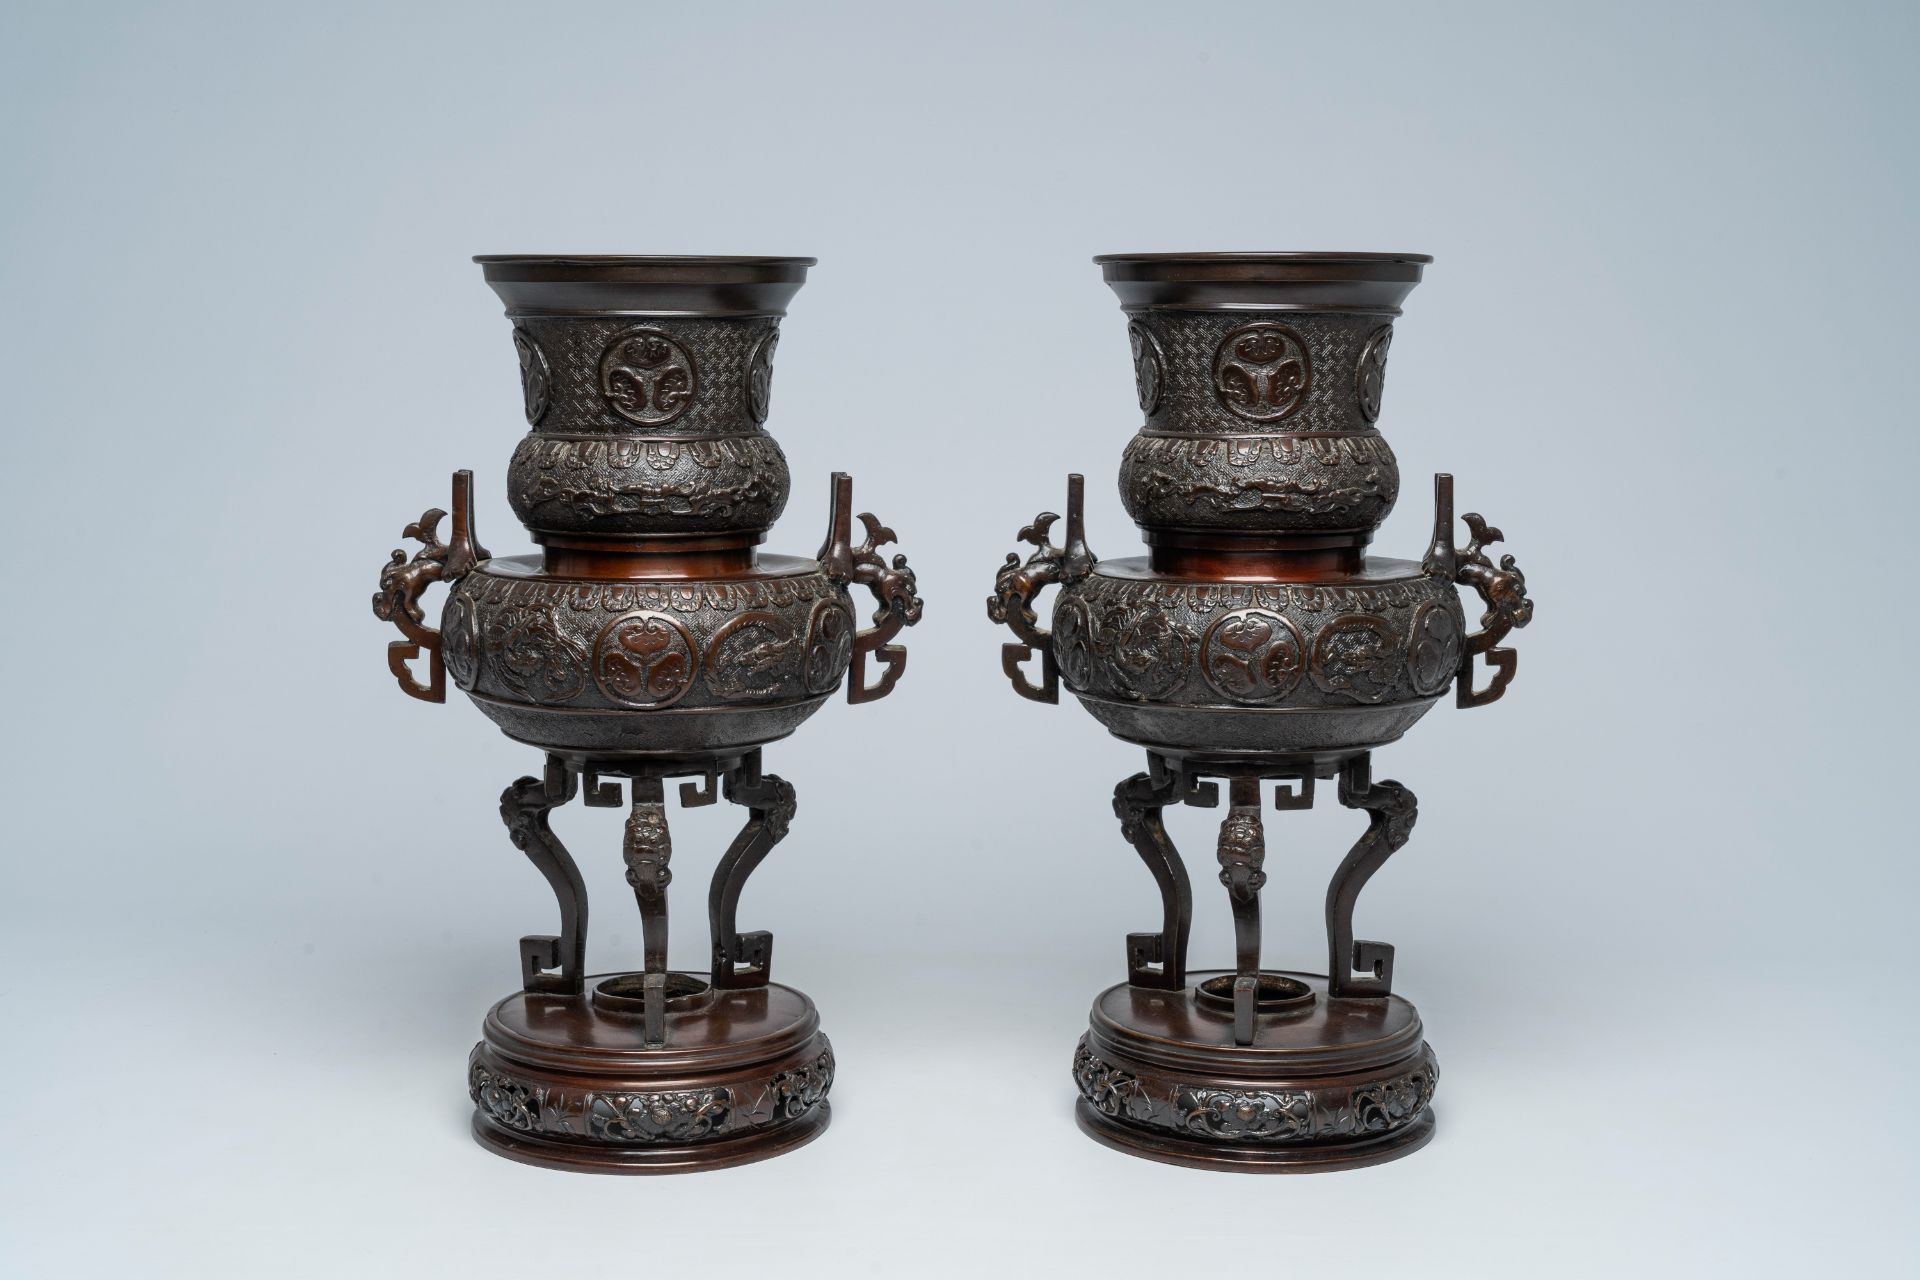 A pair of Japanese bronze vases with Tokugawa medallions in relief, Meiji, 19th C. - Image 2 of 7